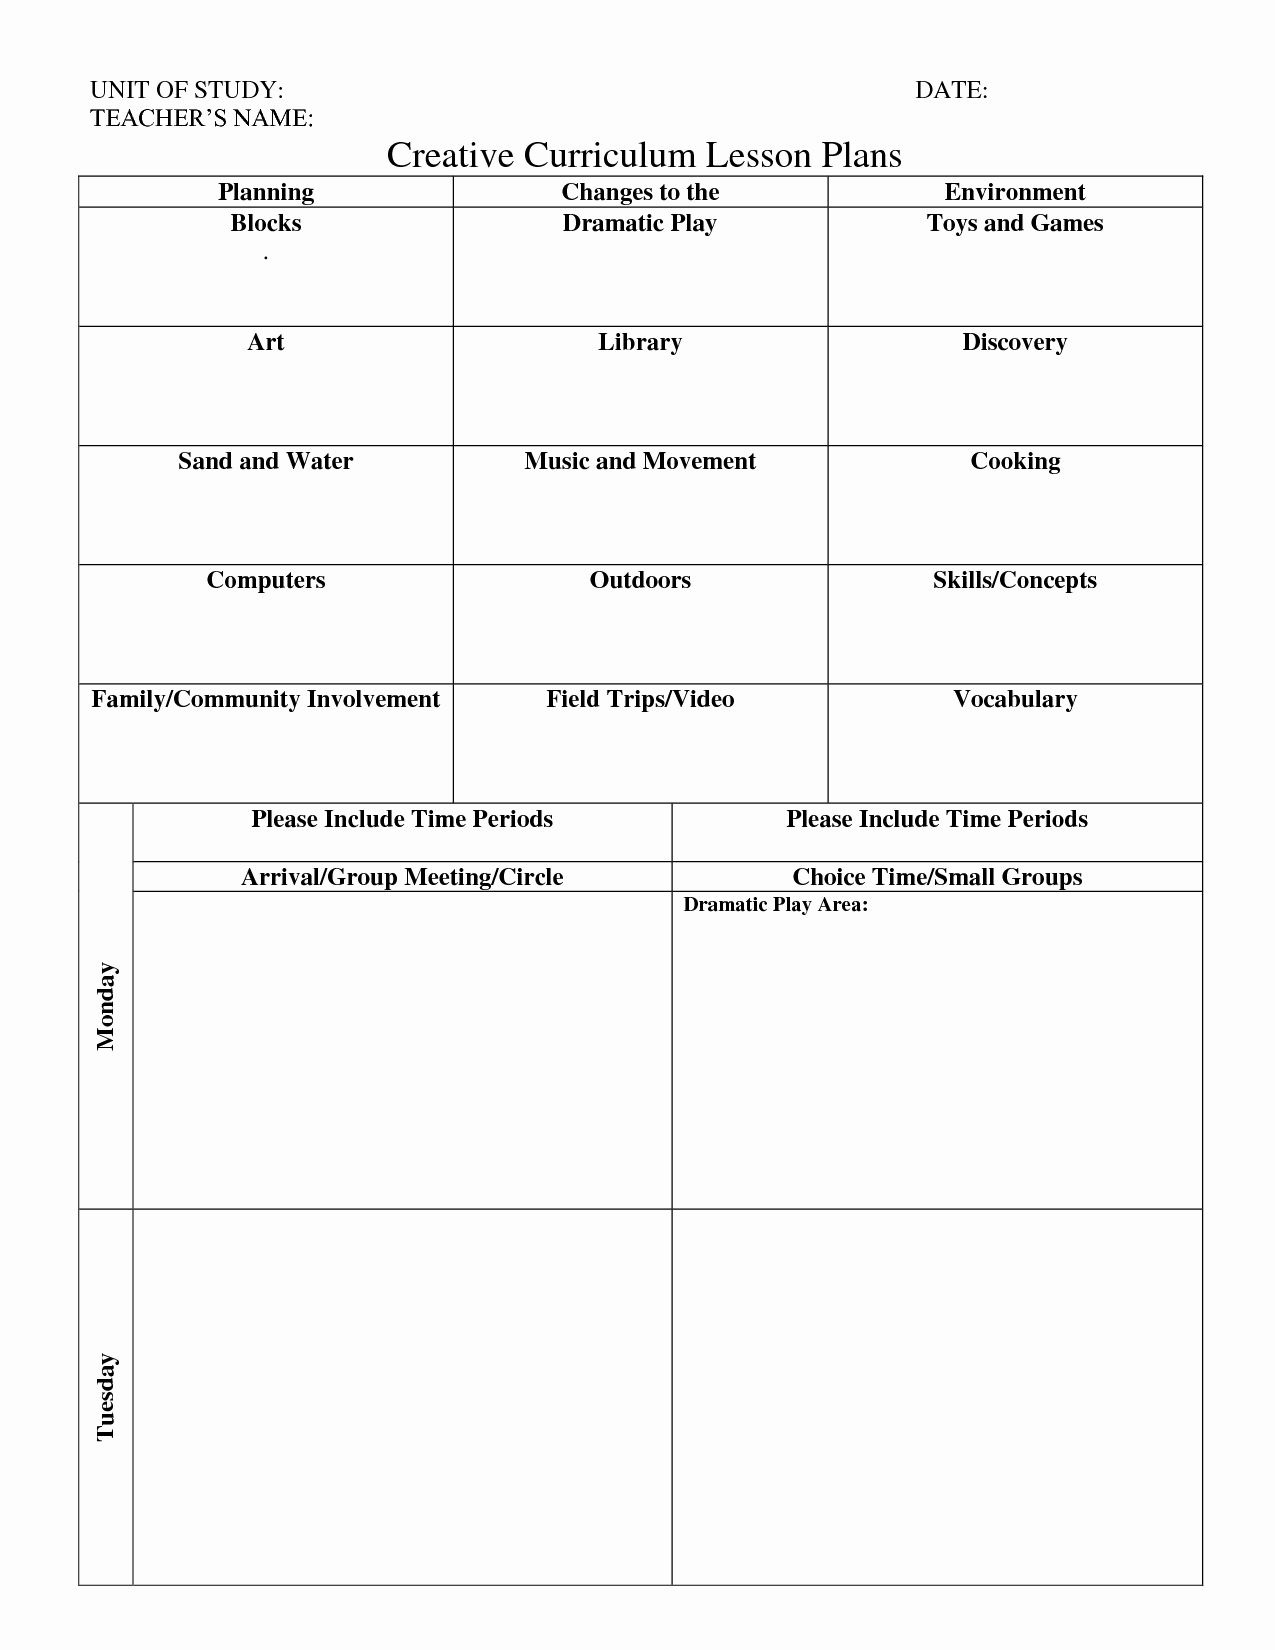 Tutoring Lesson Plan Template Awesome Print Creative Curriculum Lesson Plan Bing